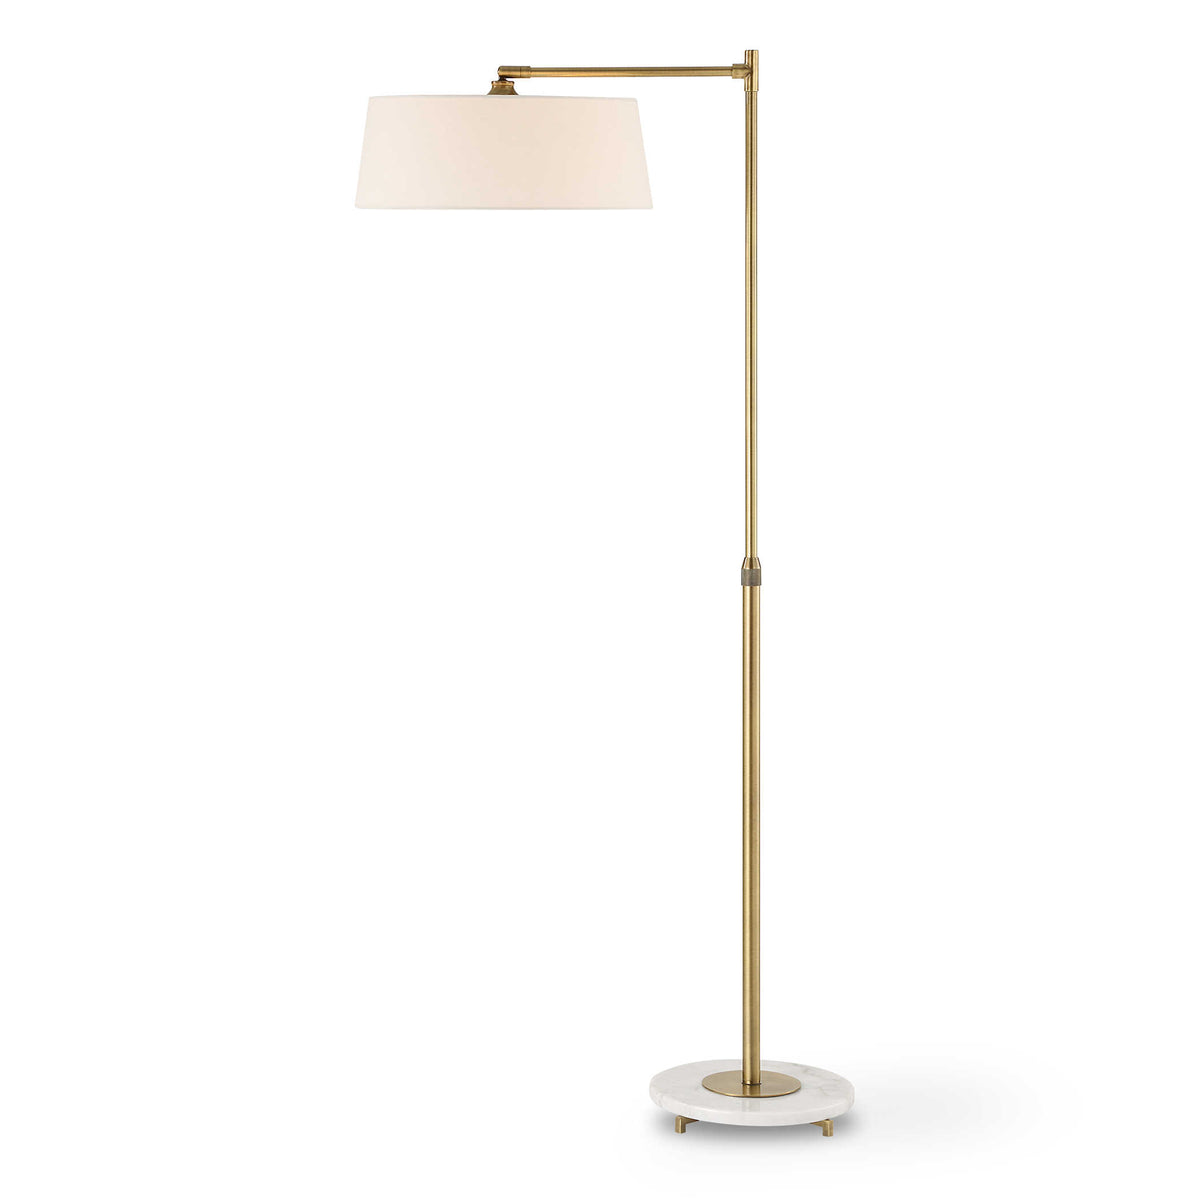 Uttermost - 30417-1 - One Light Floor Lamp - Branch Out - Antique Brushed Brass